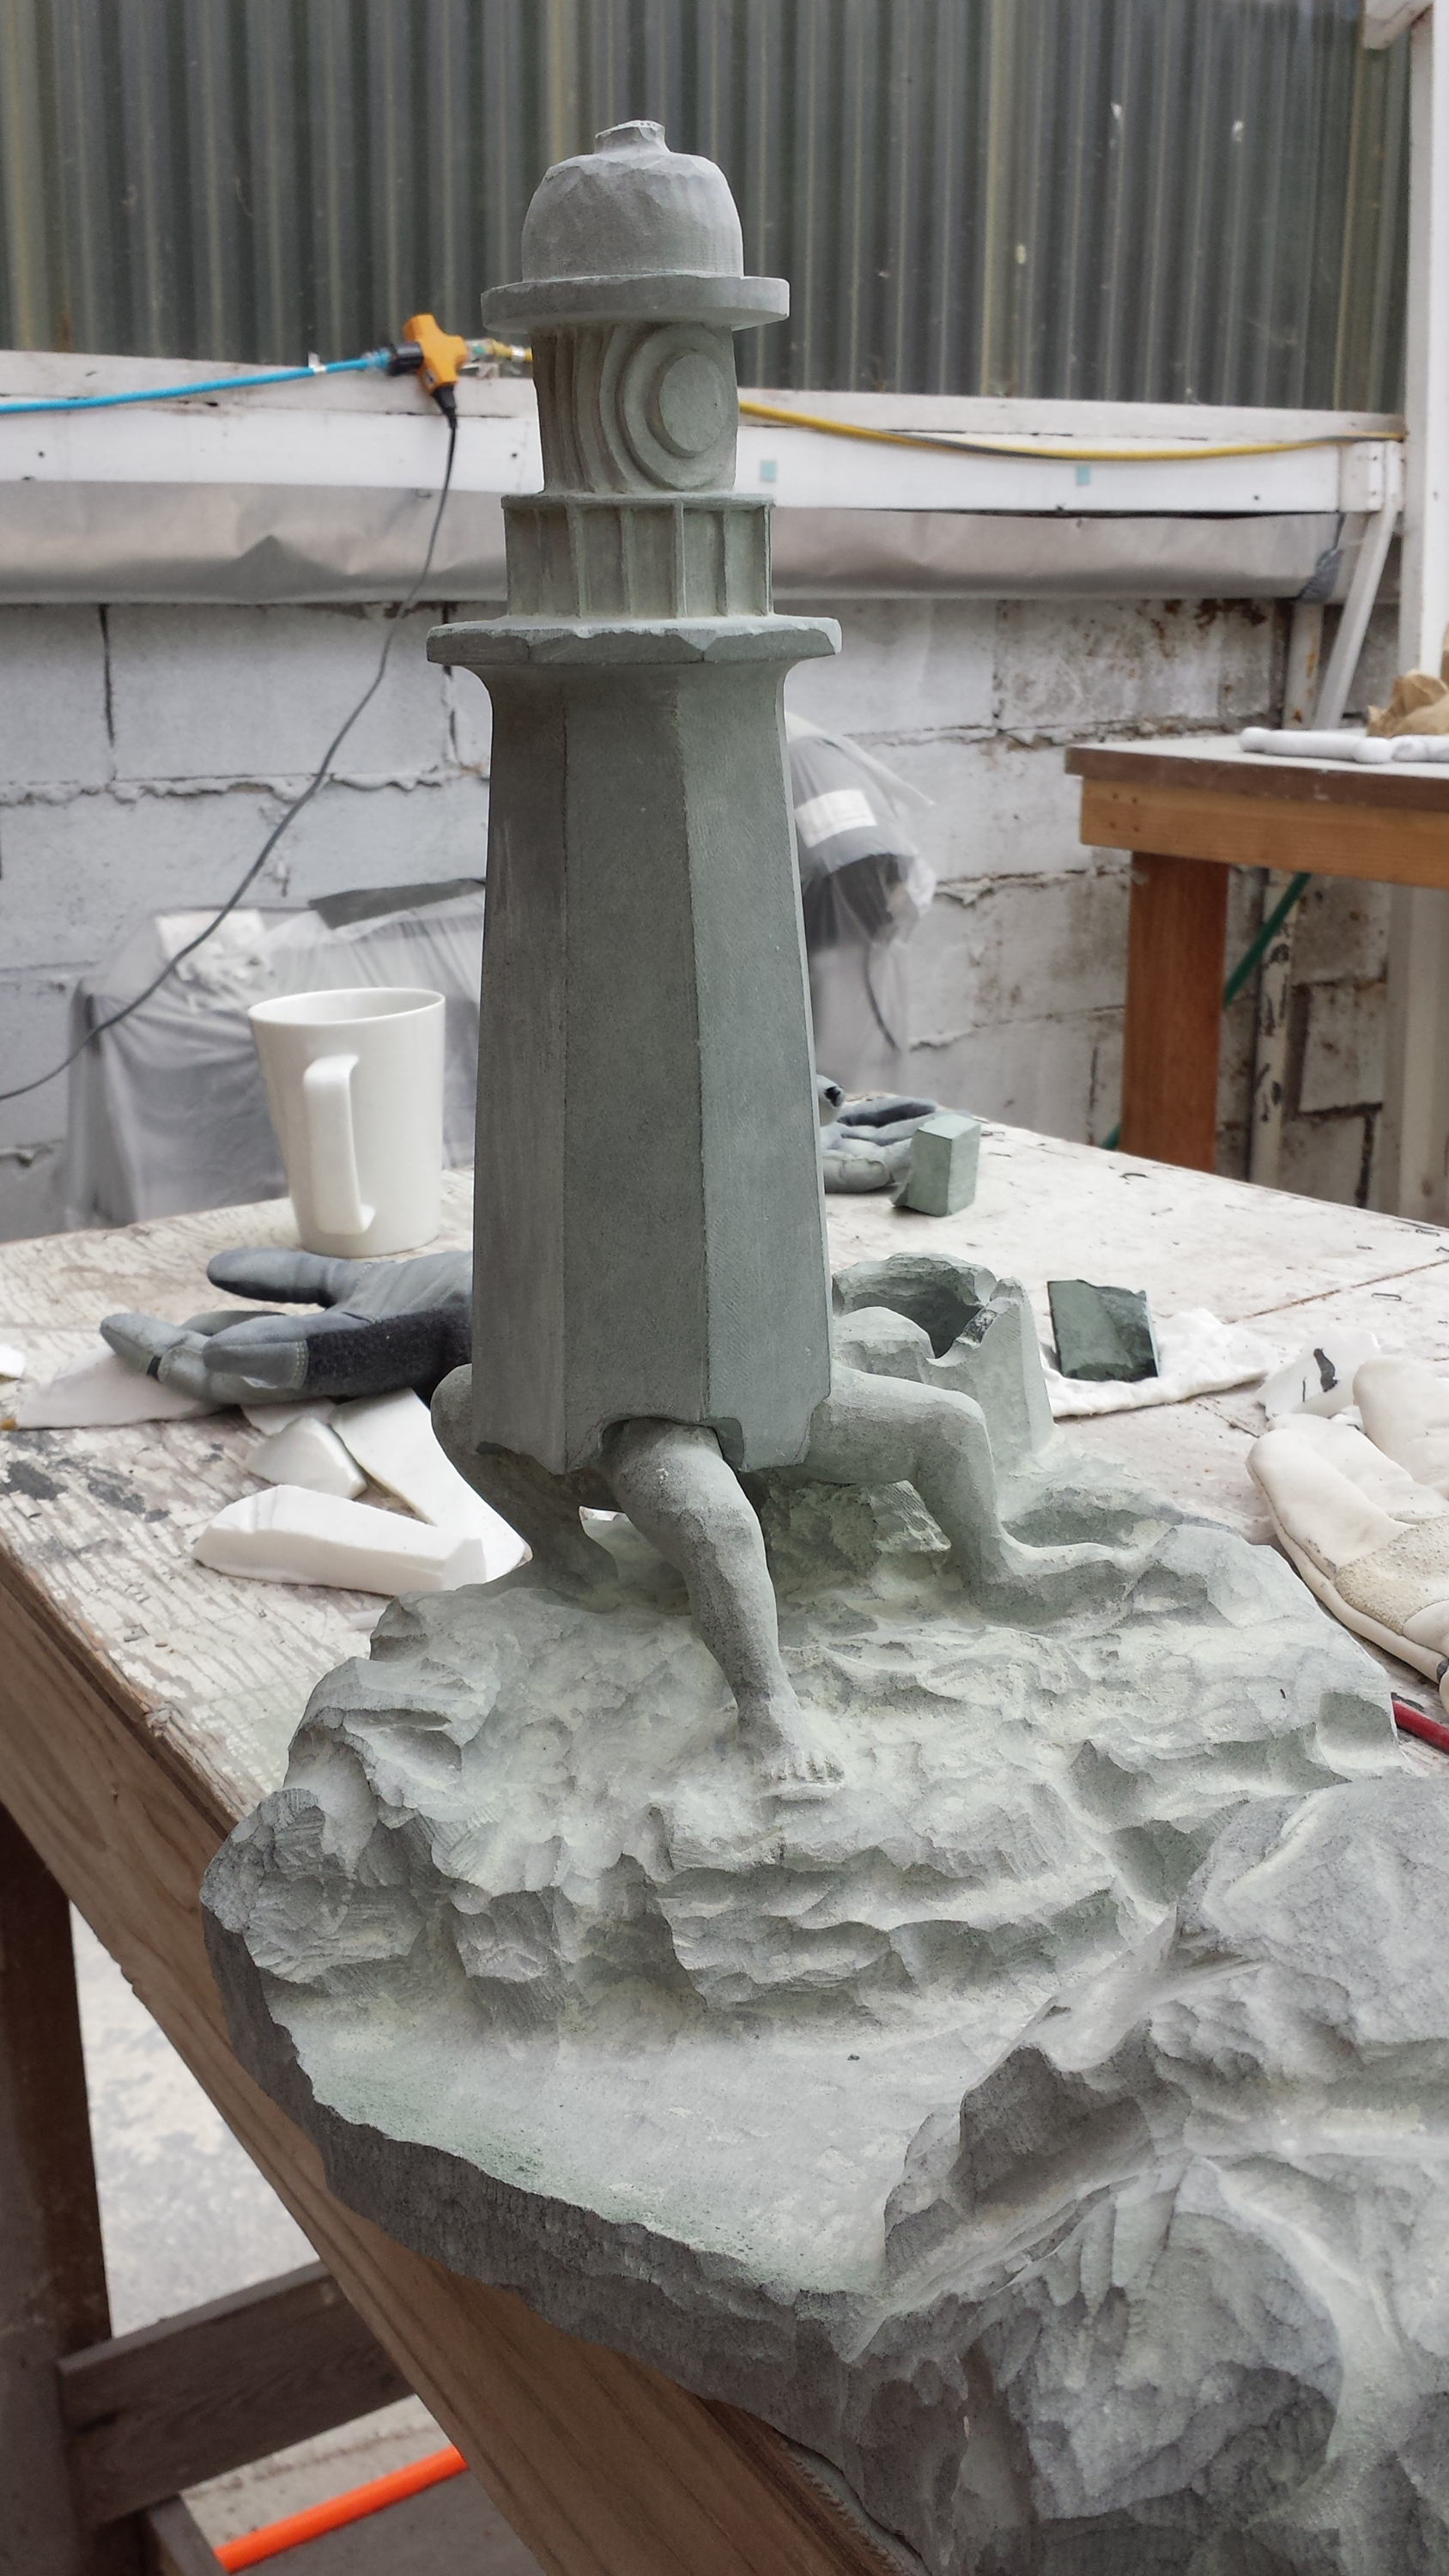 The stone carving almost finished